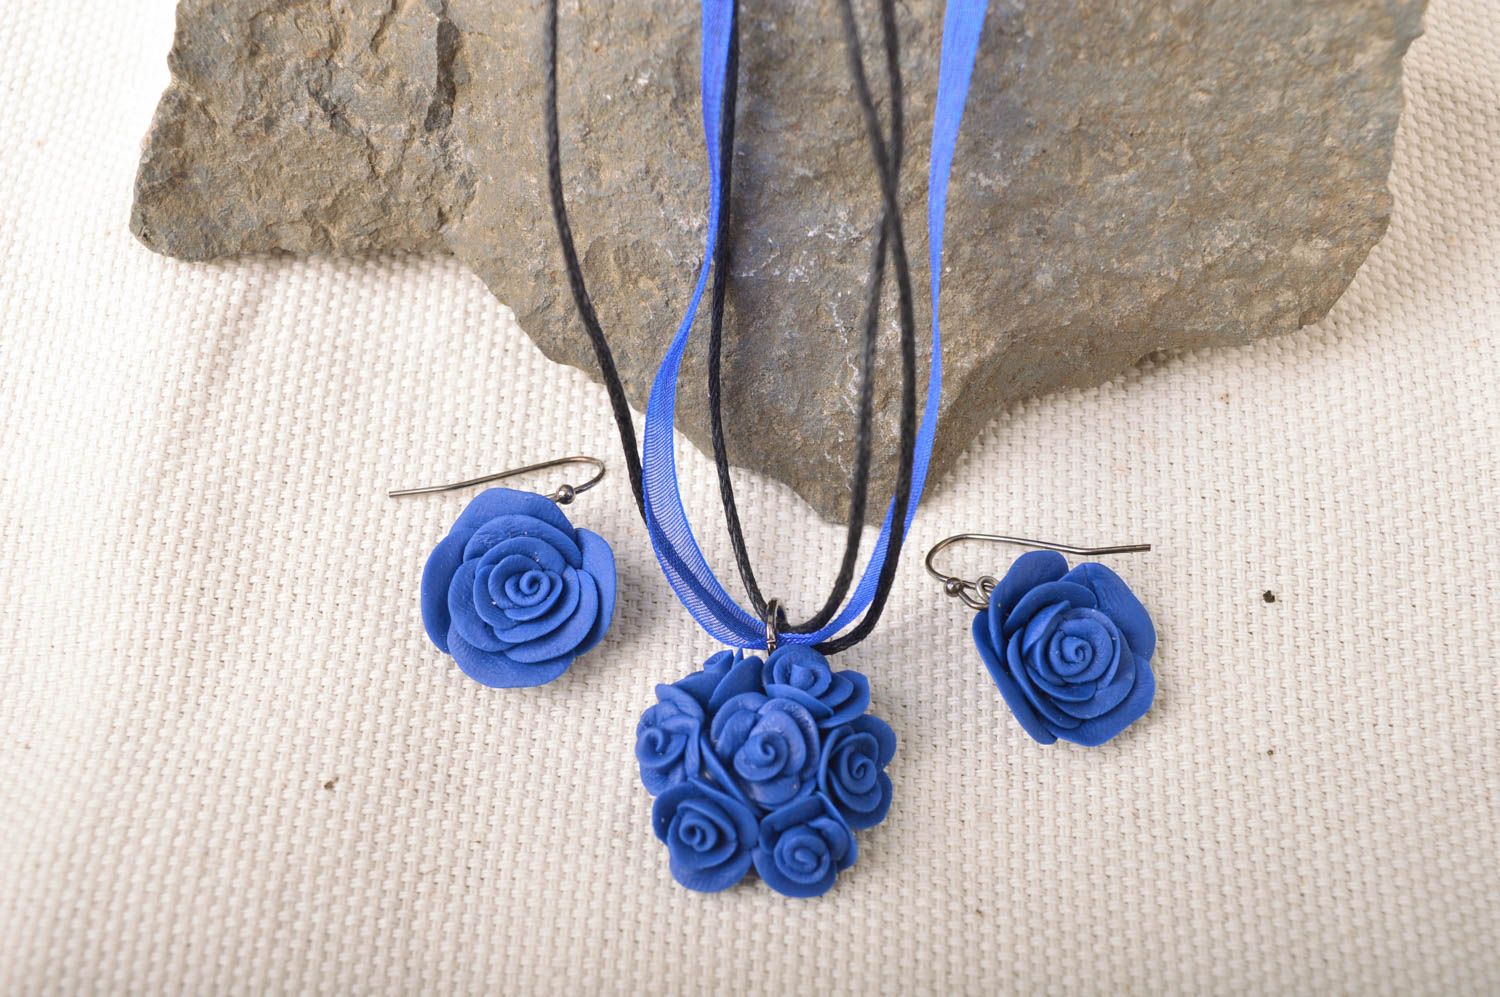 Handmade jewelry set made of cold porcelain earrings and pendant with flowers photo 1